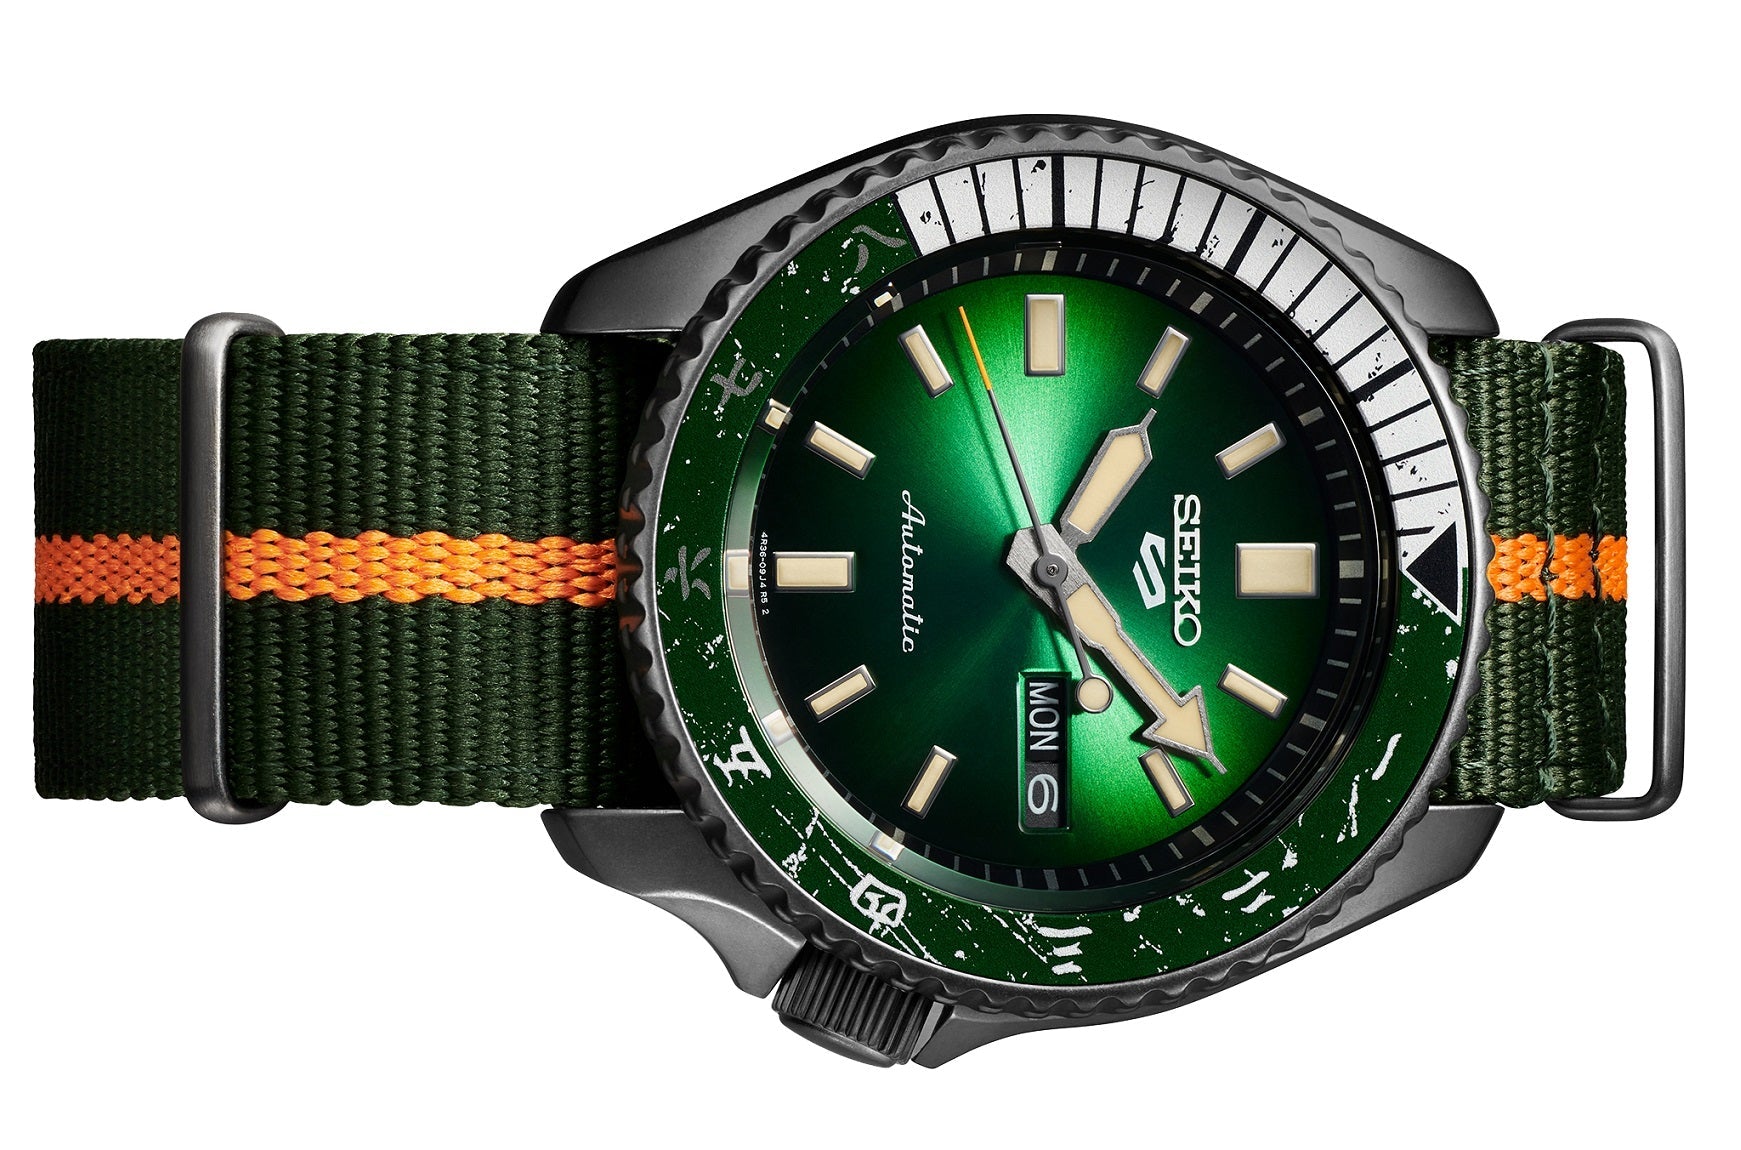 Seiko 5 SRPF73K1 Naruto Series Rock Lee Limited Edition Automatic Watch for Men's-Watch Portal Philippines